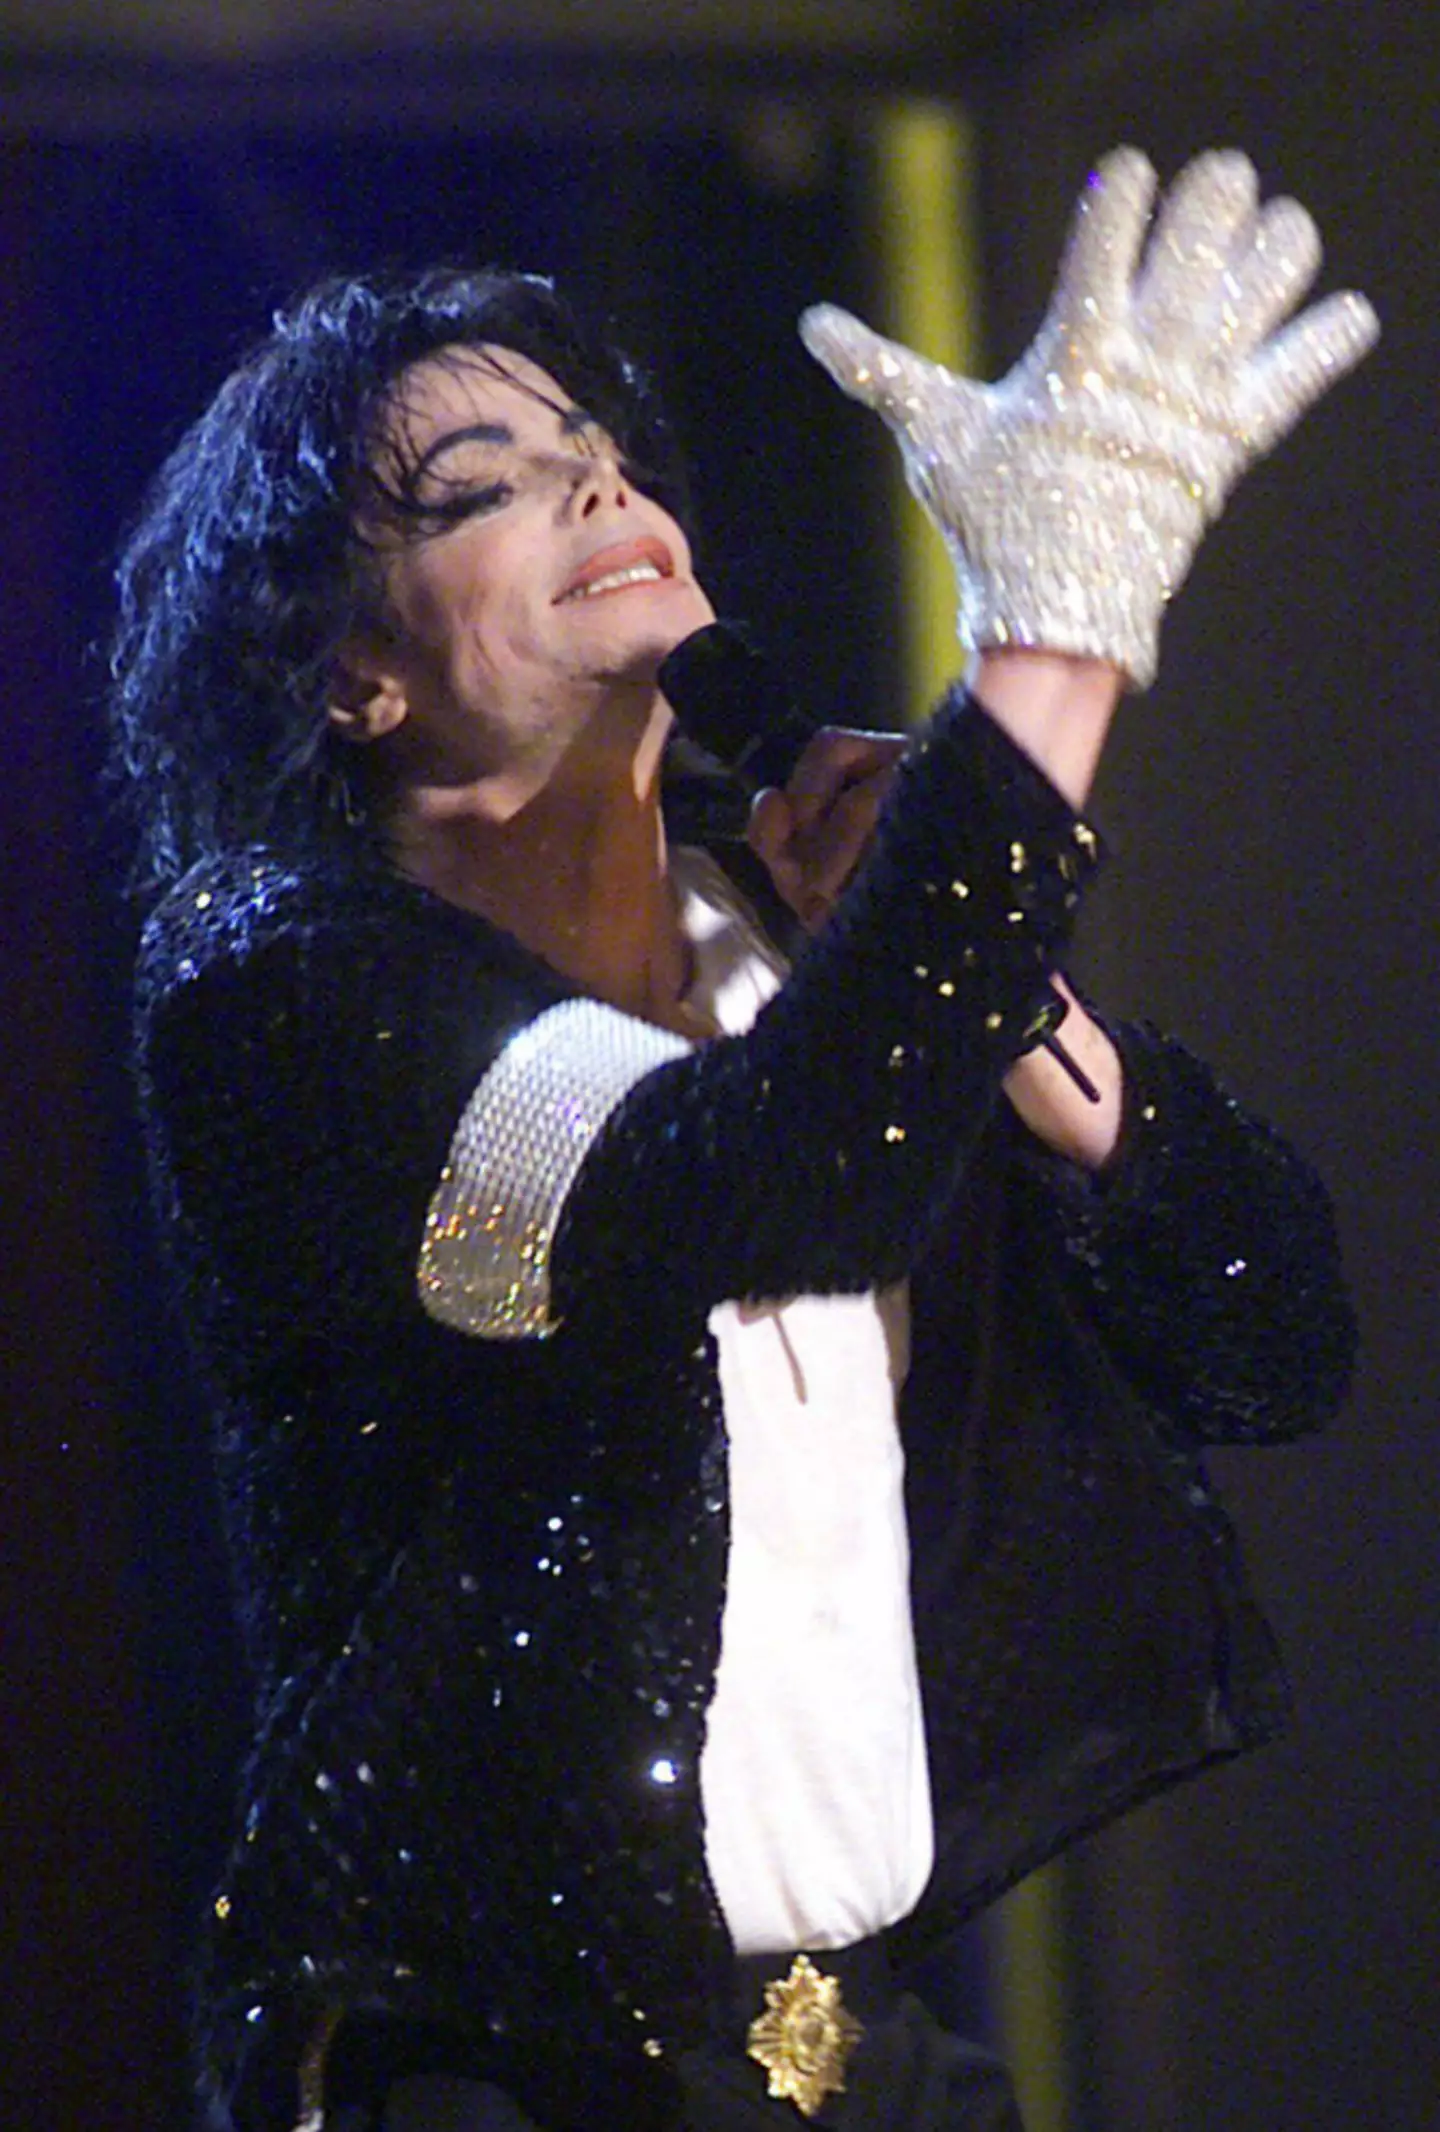 While the one white glove was part of MJ's image, there was apparently more to it than that.